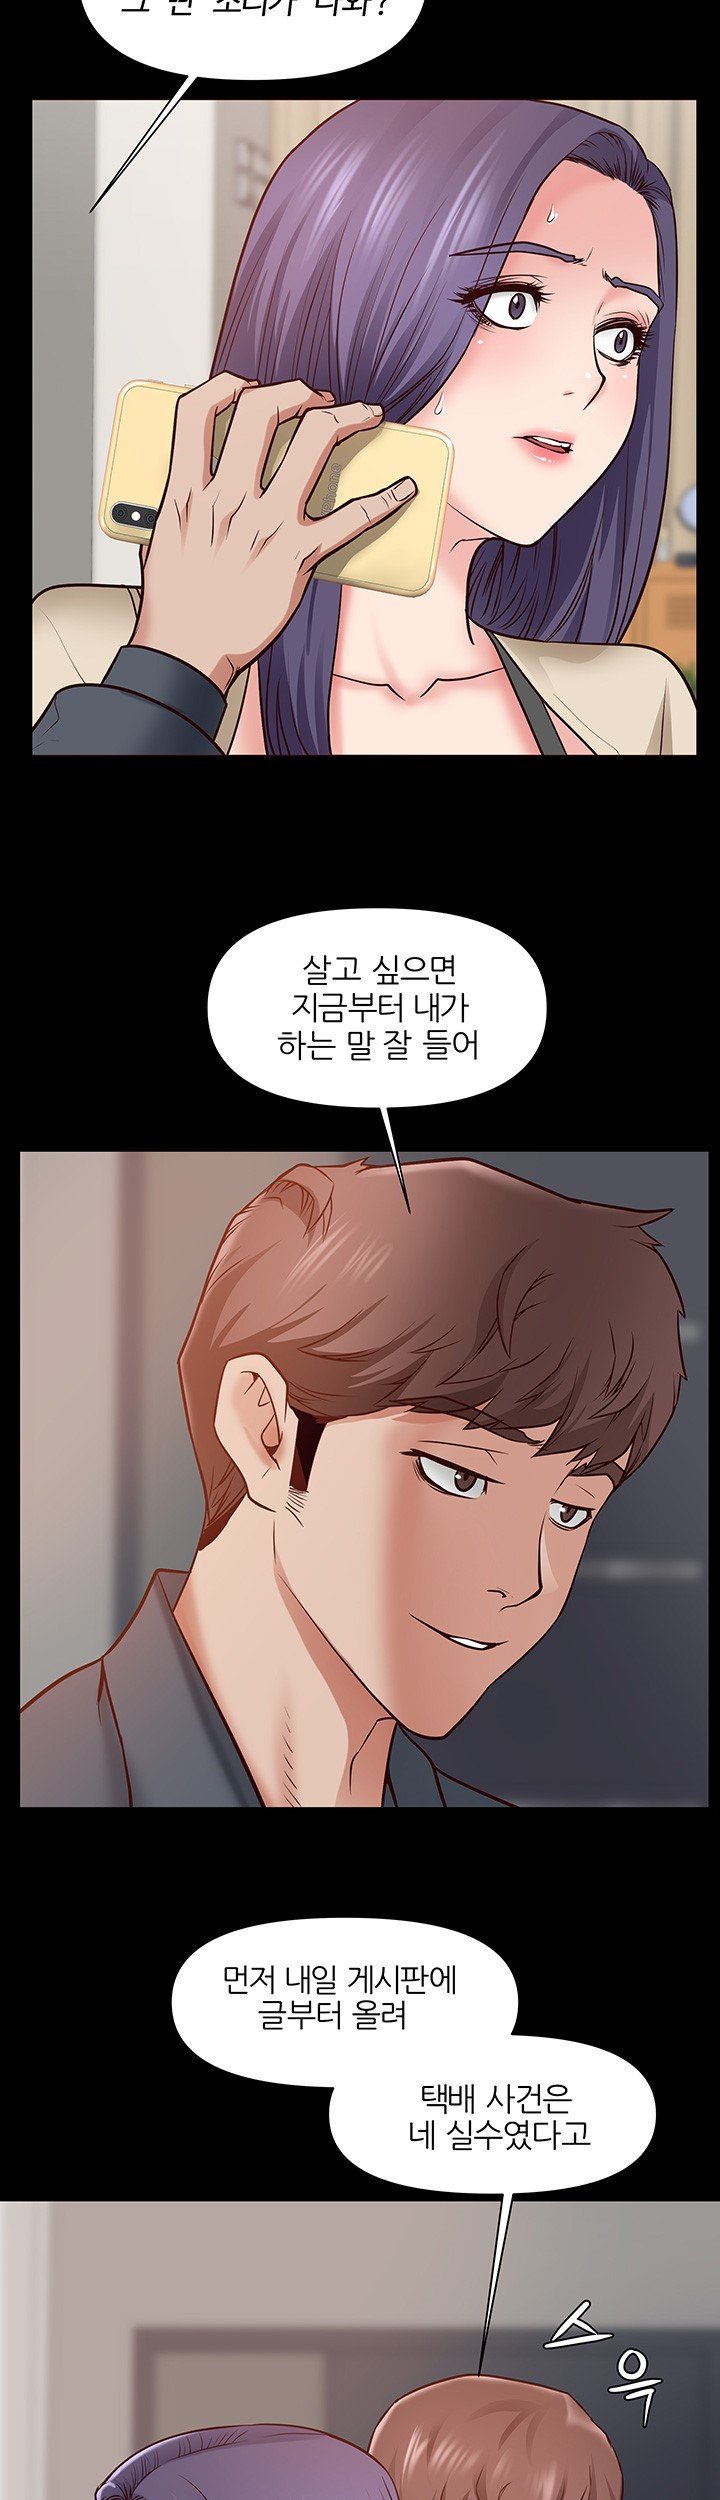 bs-anger-raw-chap-2-18